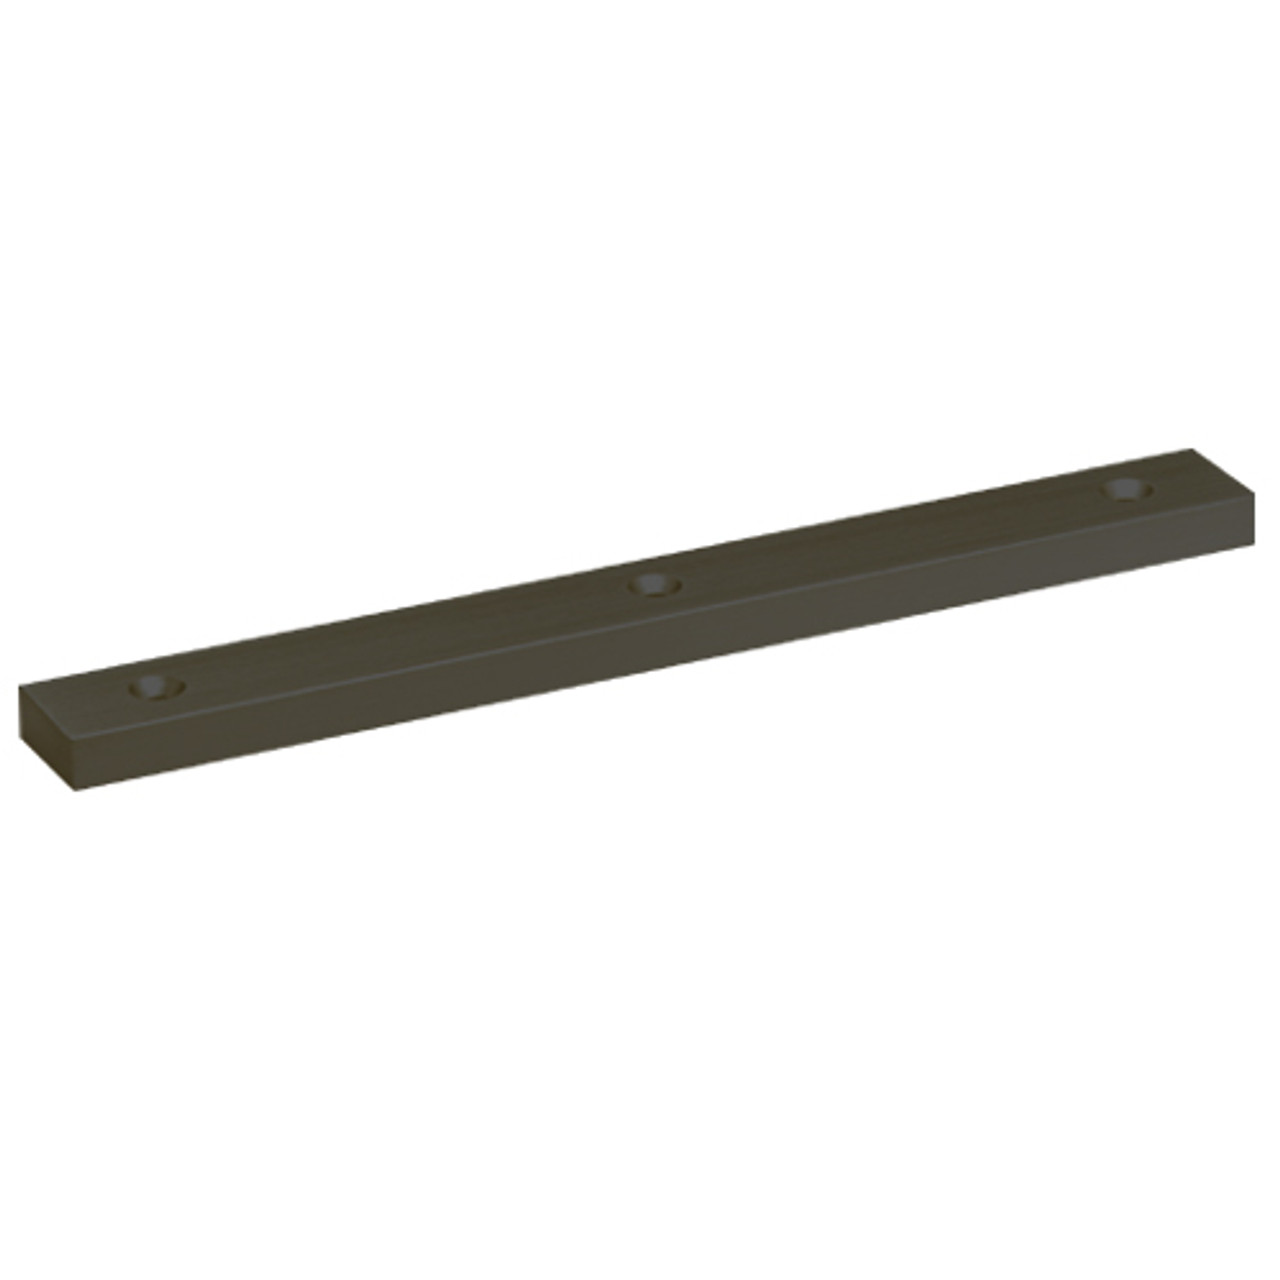 4125-US10B DynaLock 4000 Series Filler Plates for Double Maglocks in Oil Rubbed Bronze